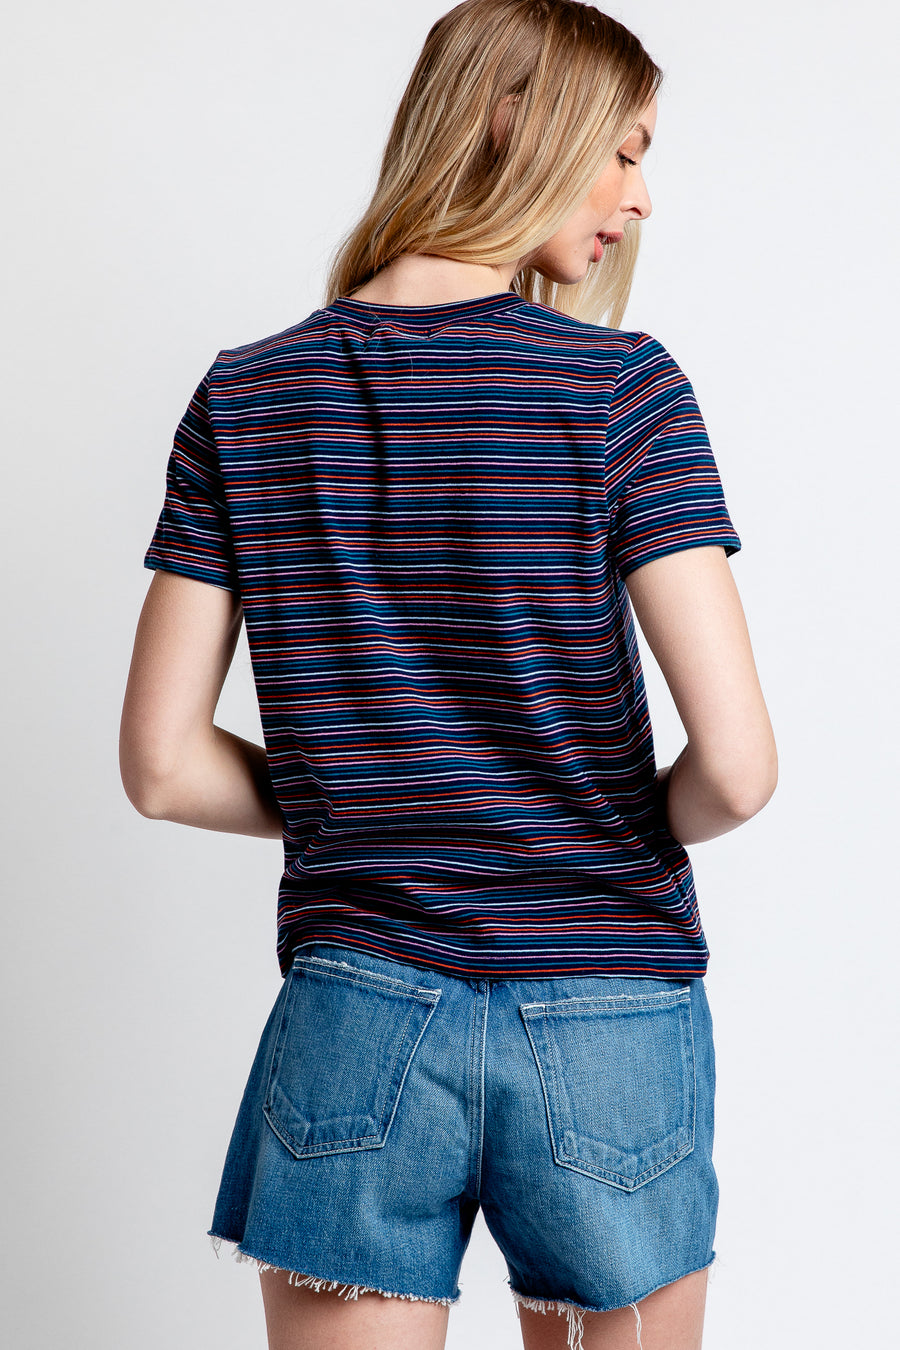 Michael Stars Gerry Stripe Tee in Nocturnal Combo